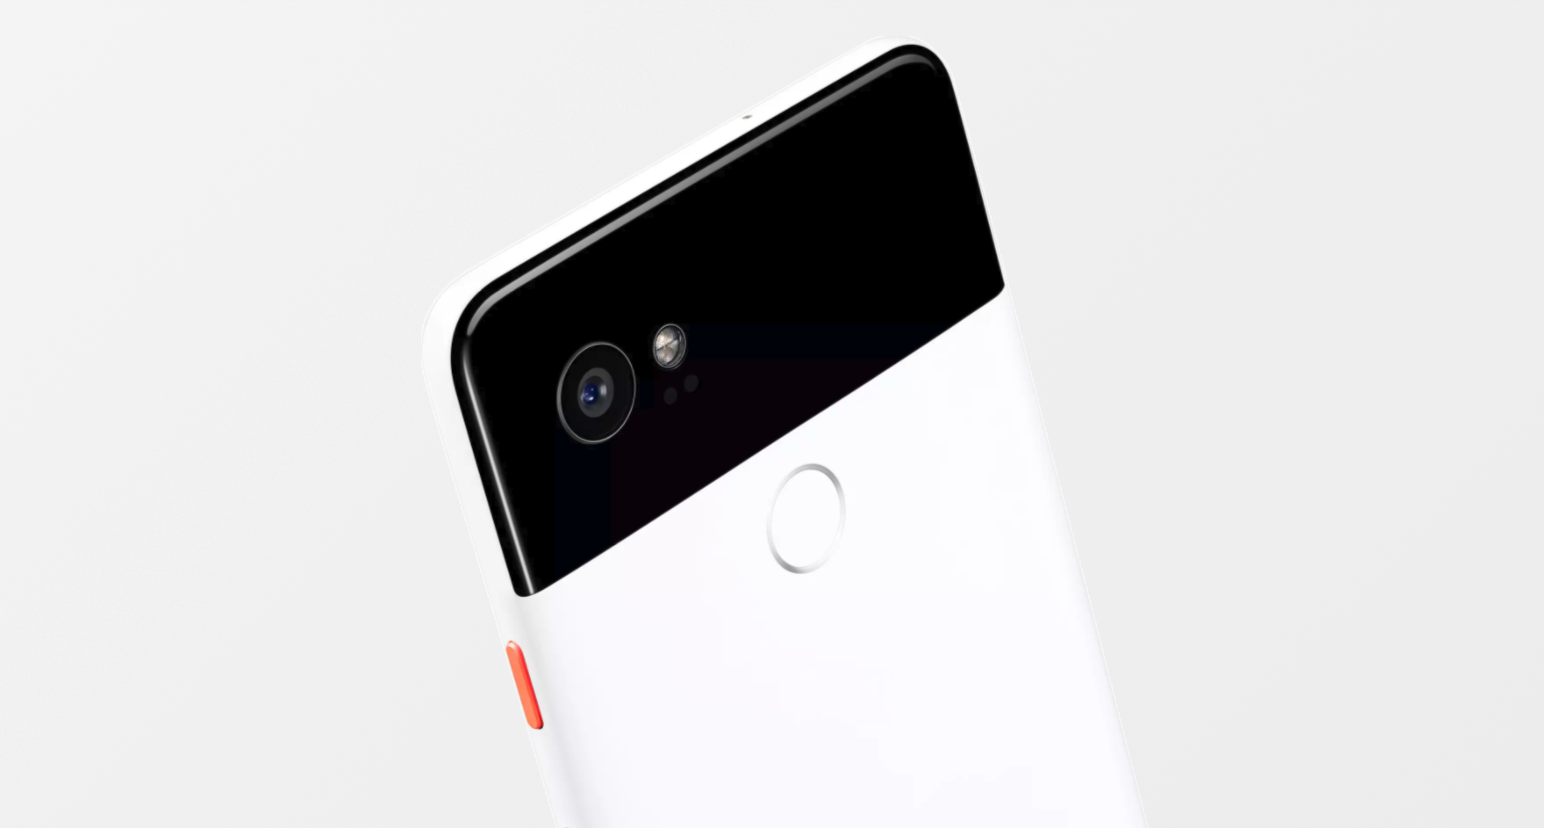 Google Pixel 2 owners cannot seem to unlock their bootloaders